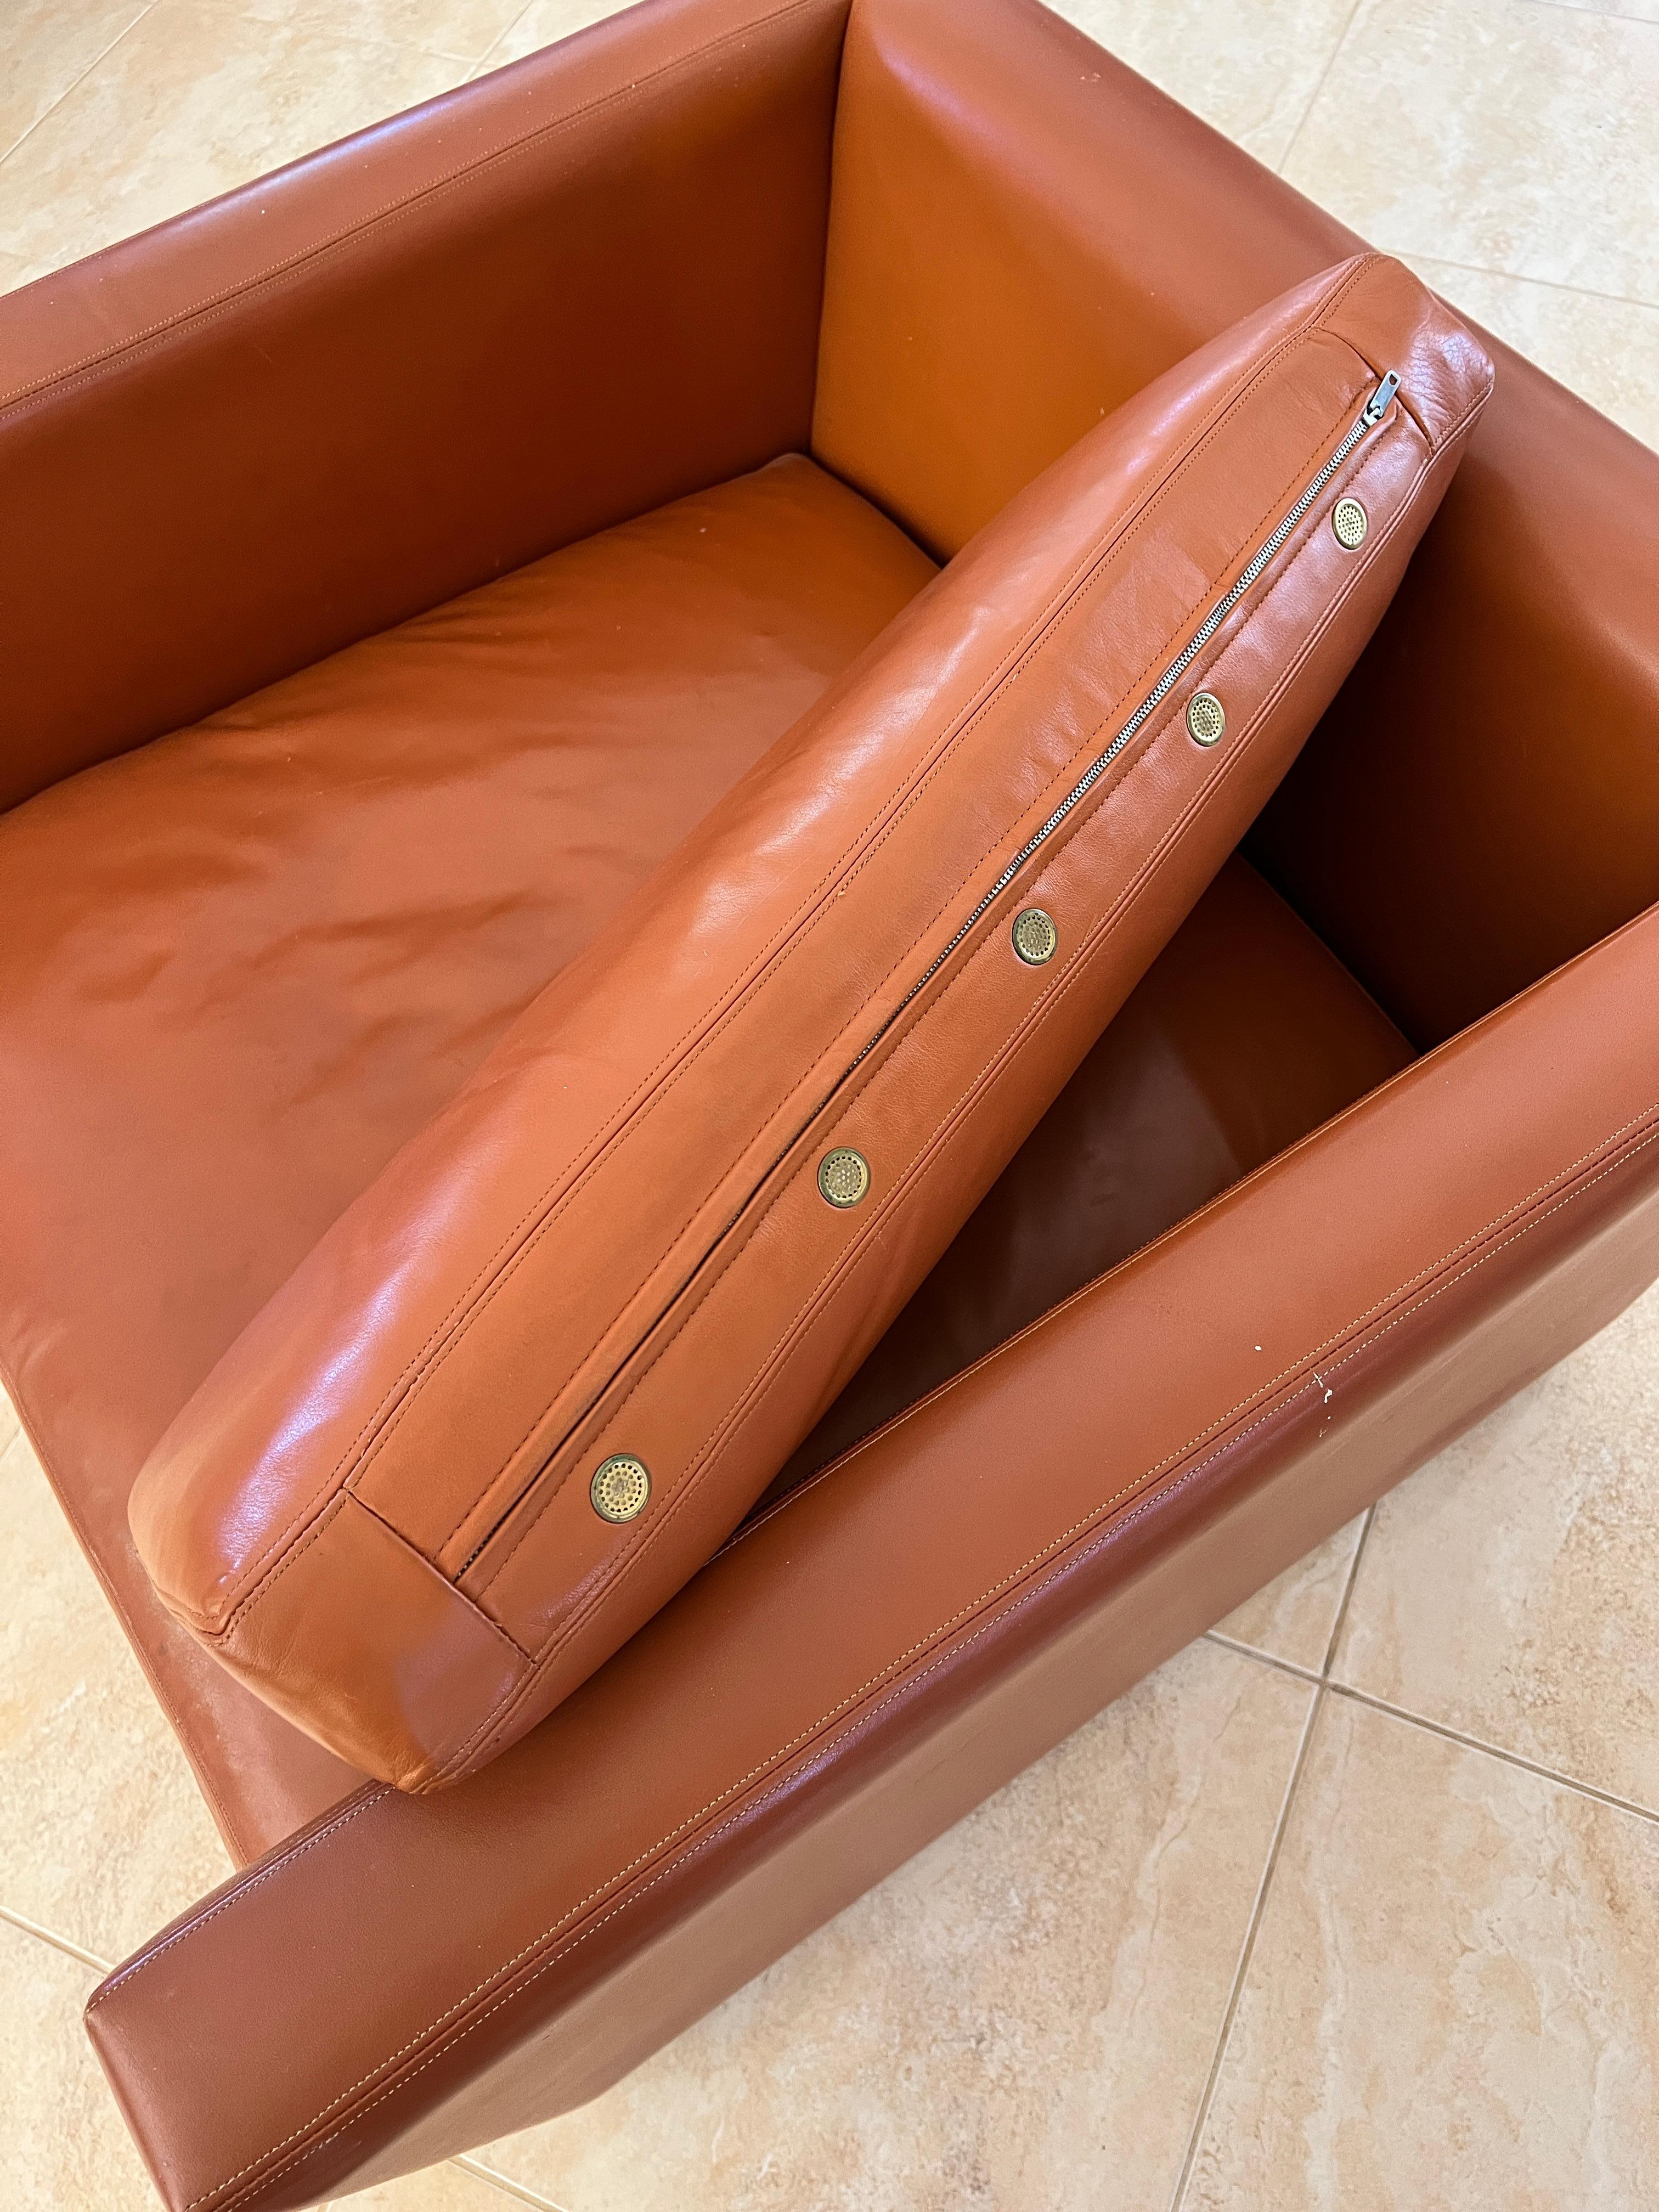 Knoll Cube Lounge Chair by Charles Pfister 1971 Original Sabrina Leather, #1 In Good Condition For Sale In Brenham, TX